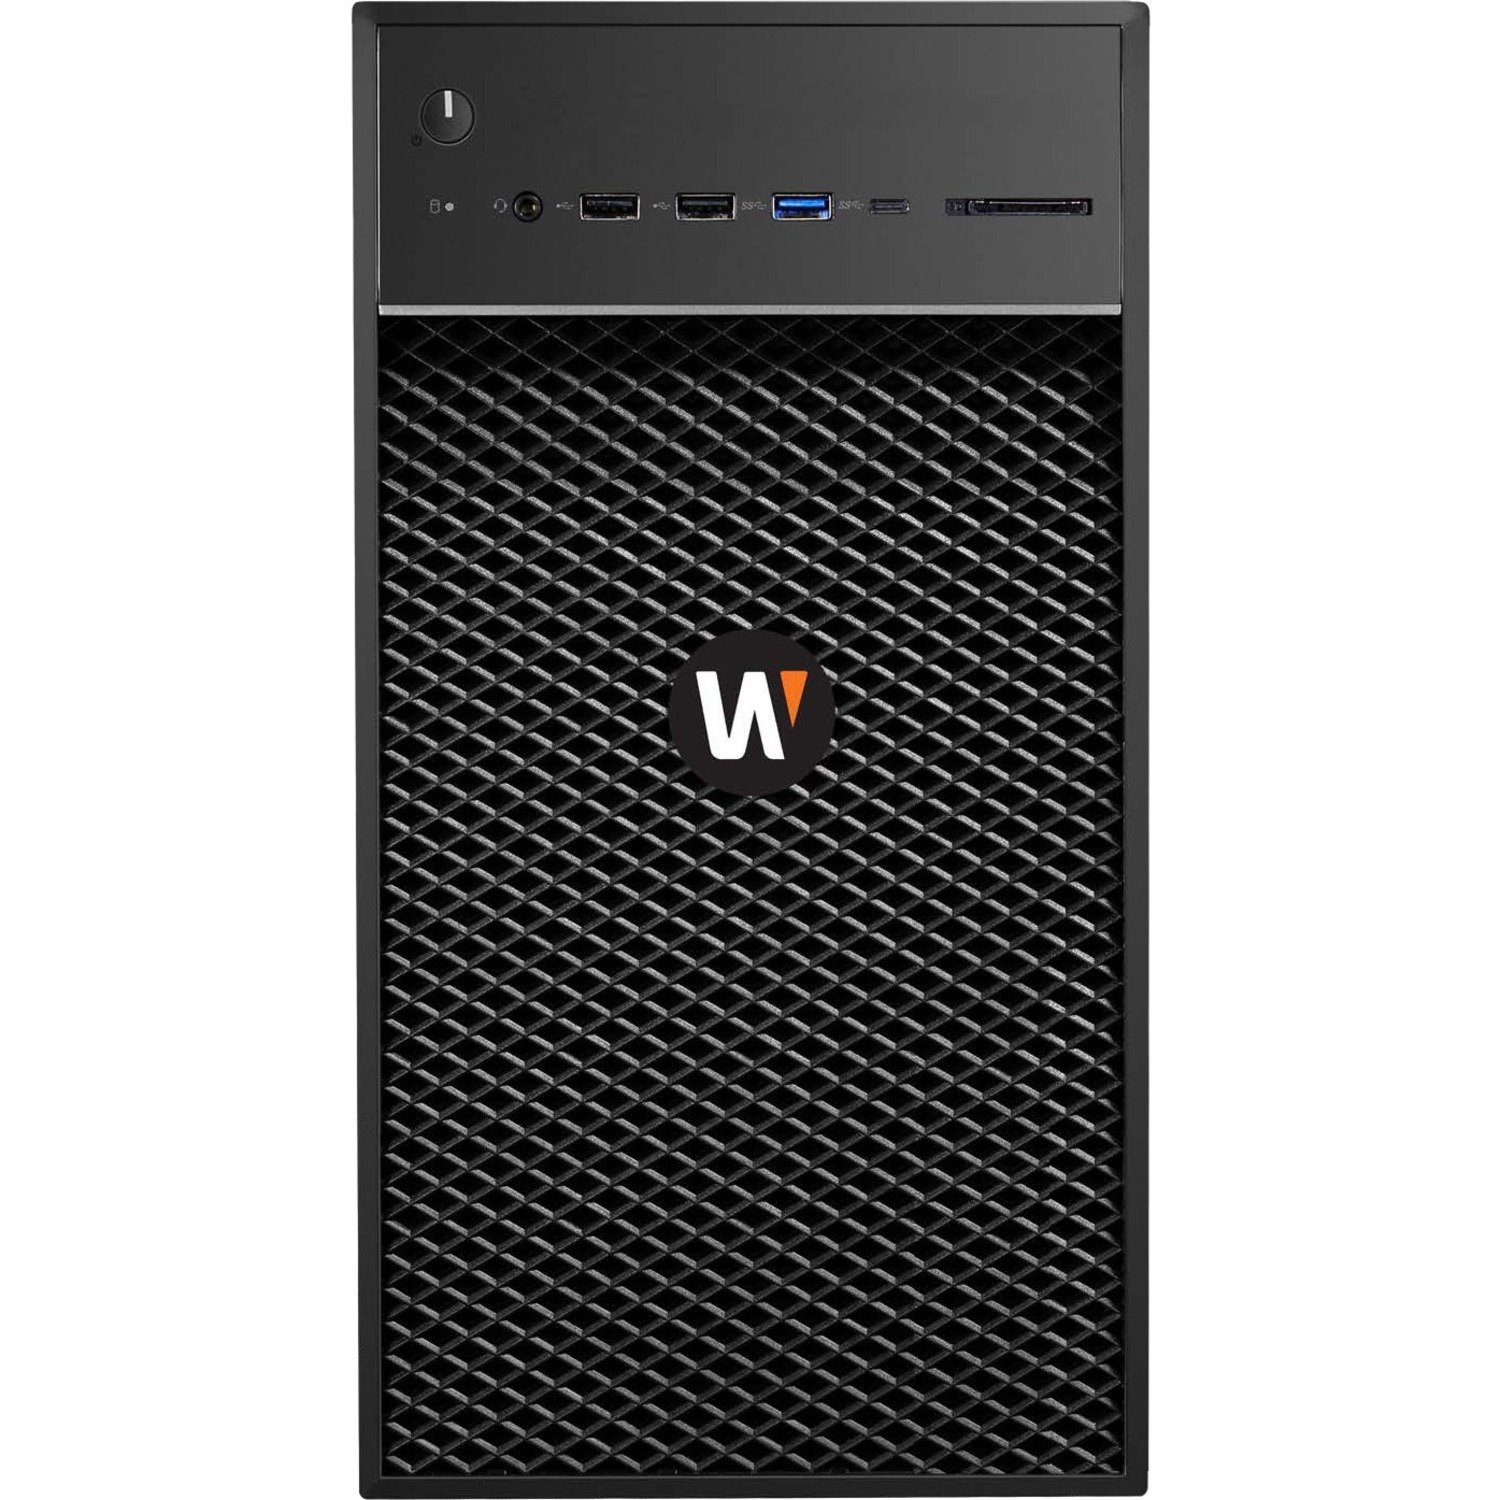 Wisenet WAVE Network Video Recorder - 8 TB HDD